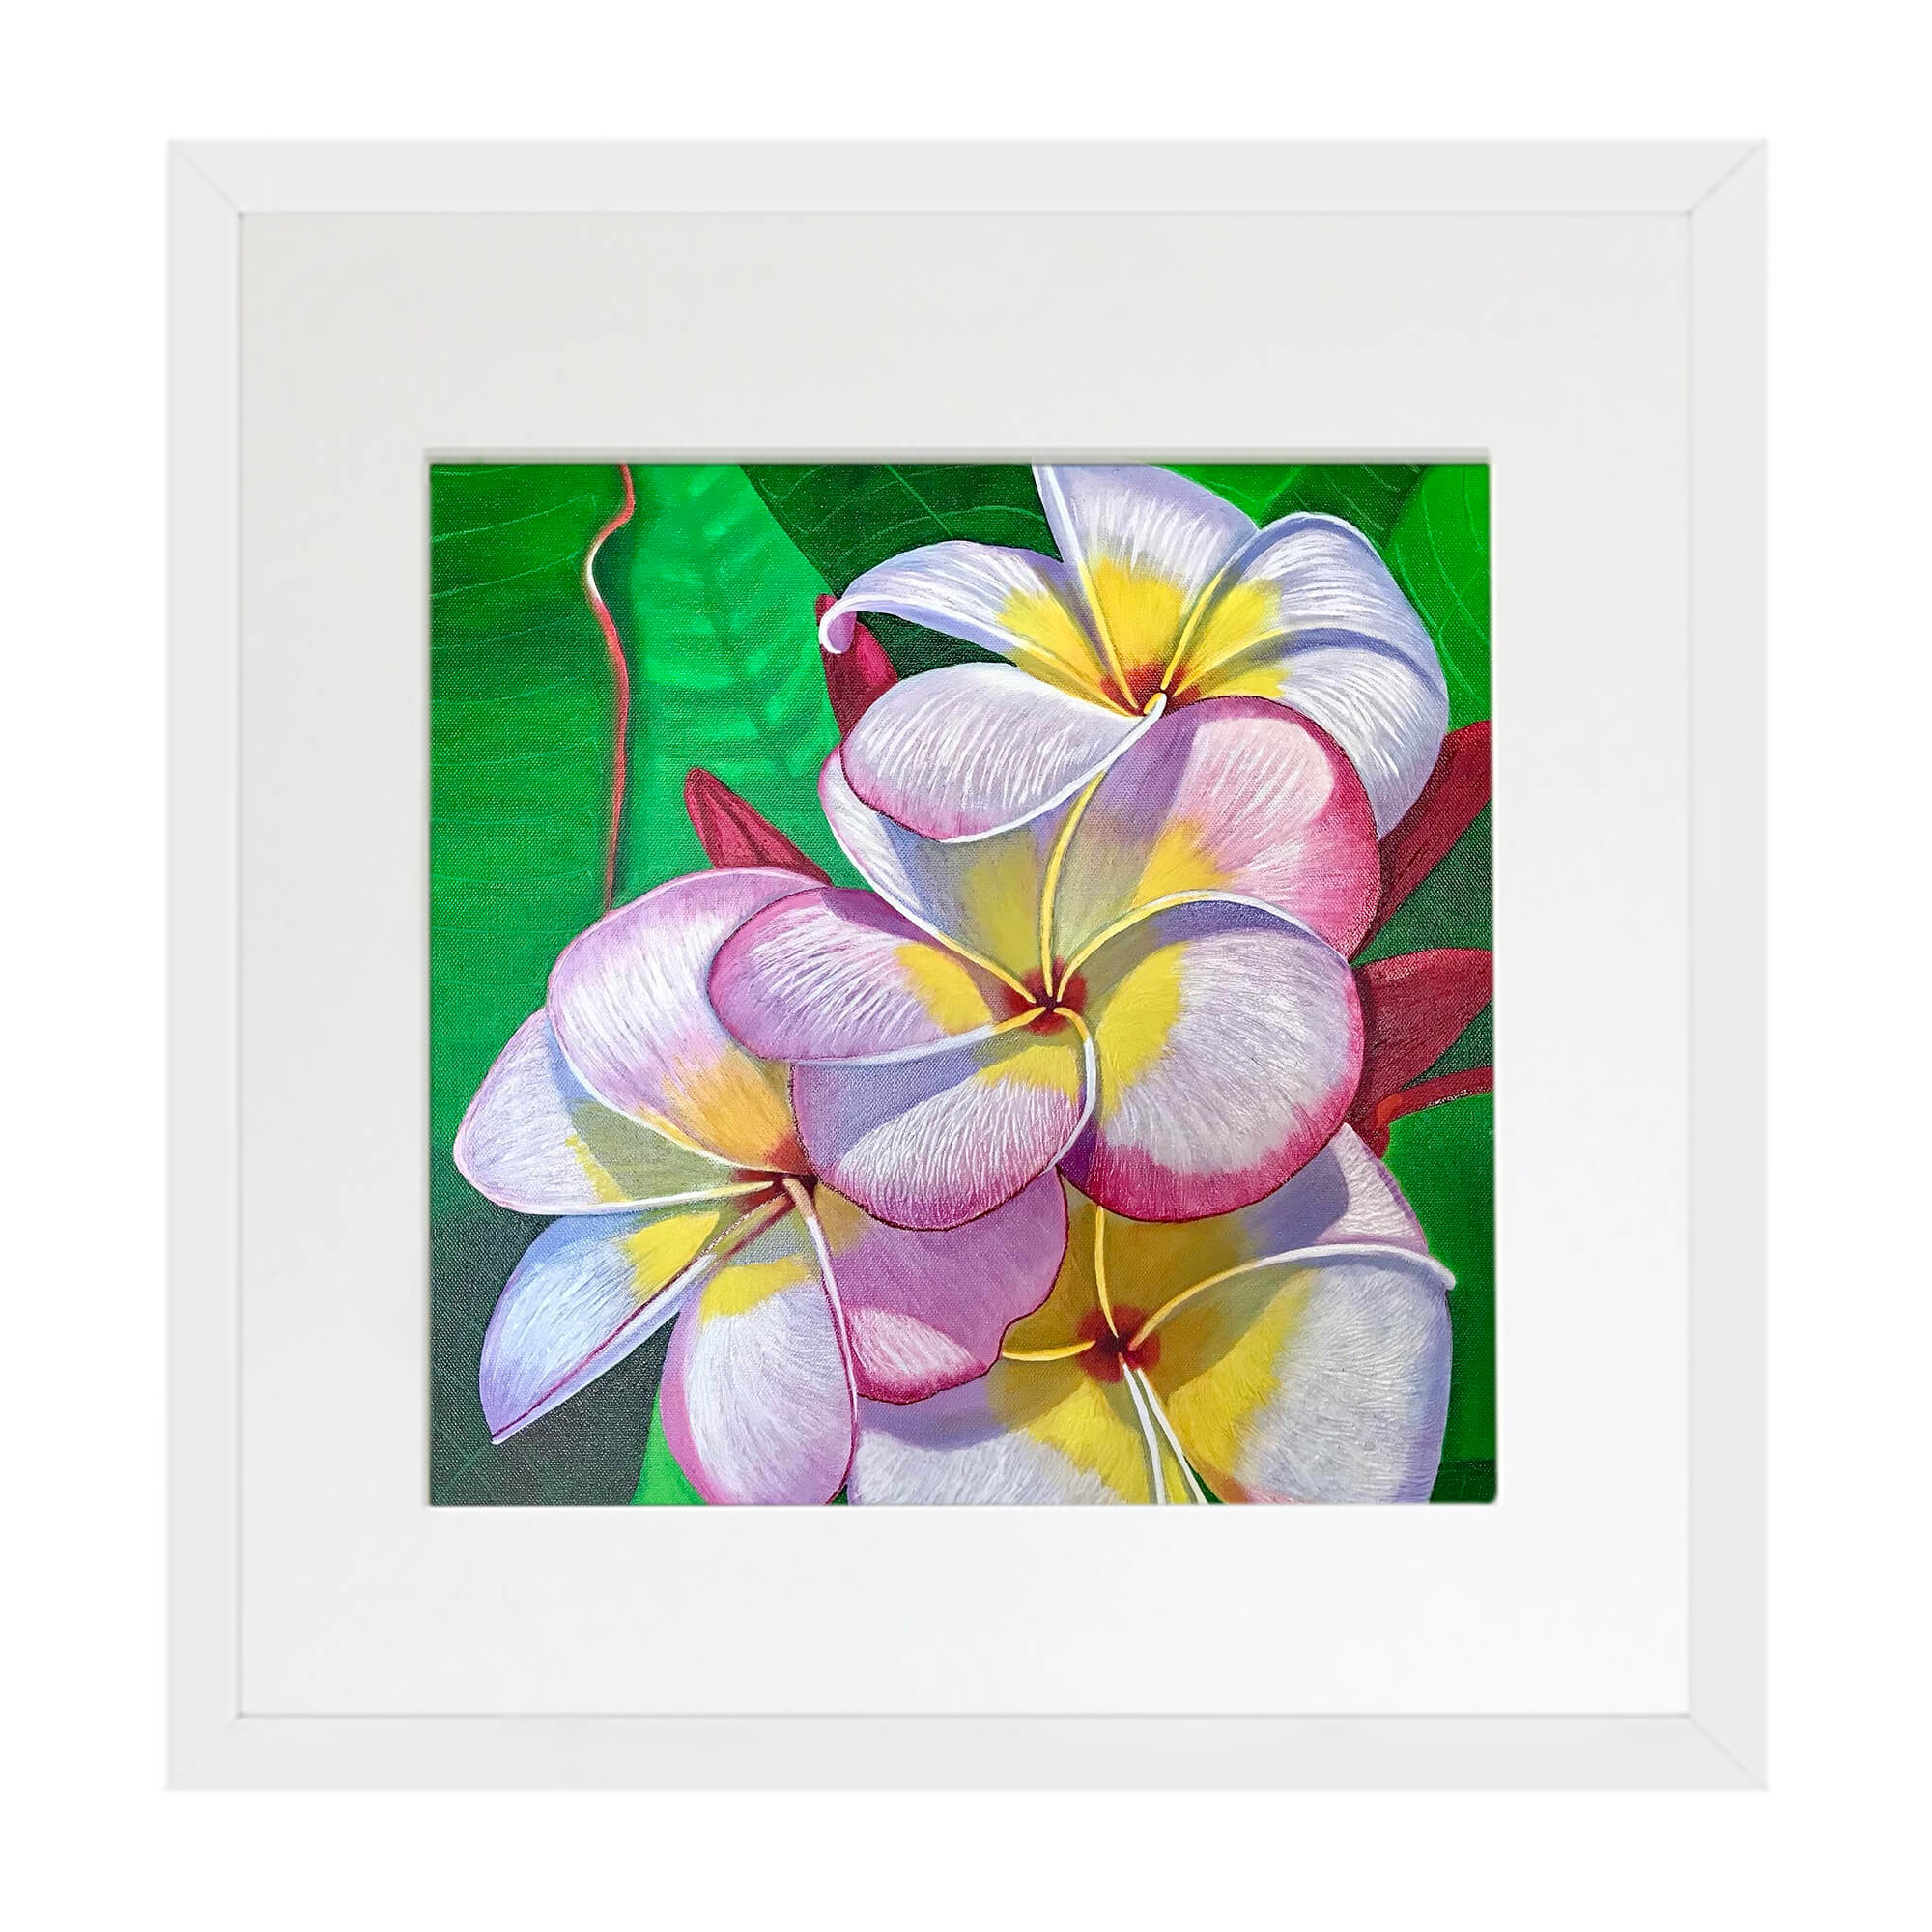 Matted art print with white frame featuring four white flowers by hawaii artist Galina Lintz